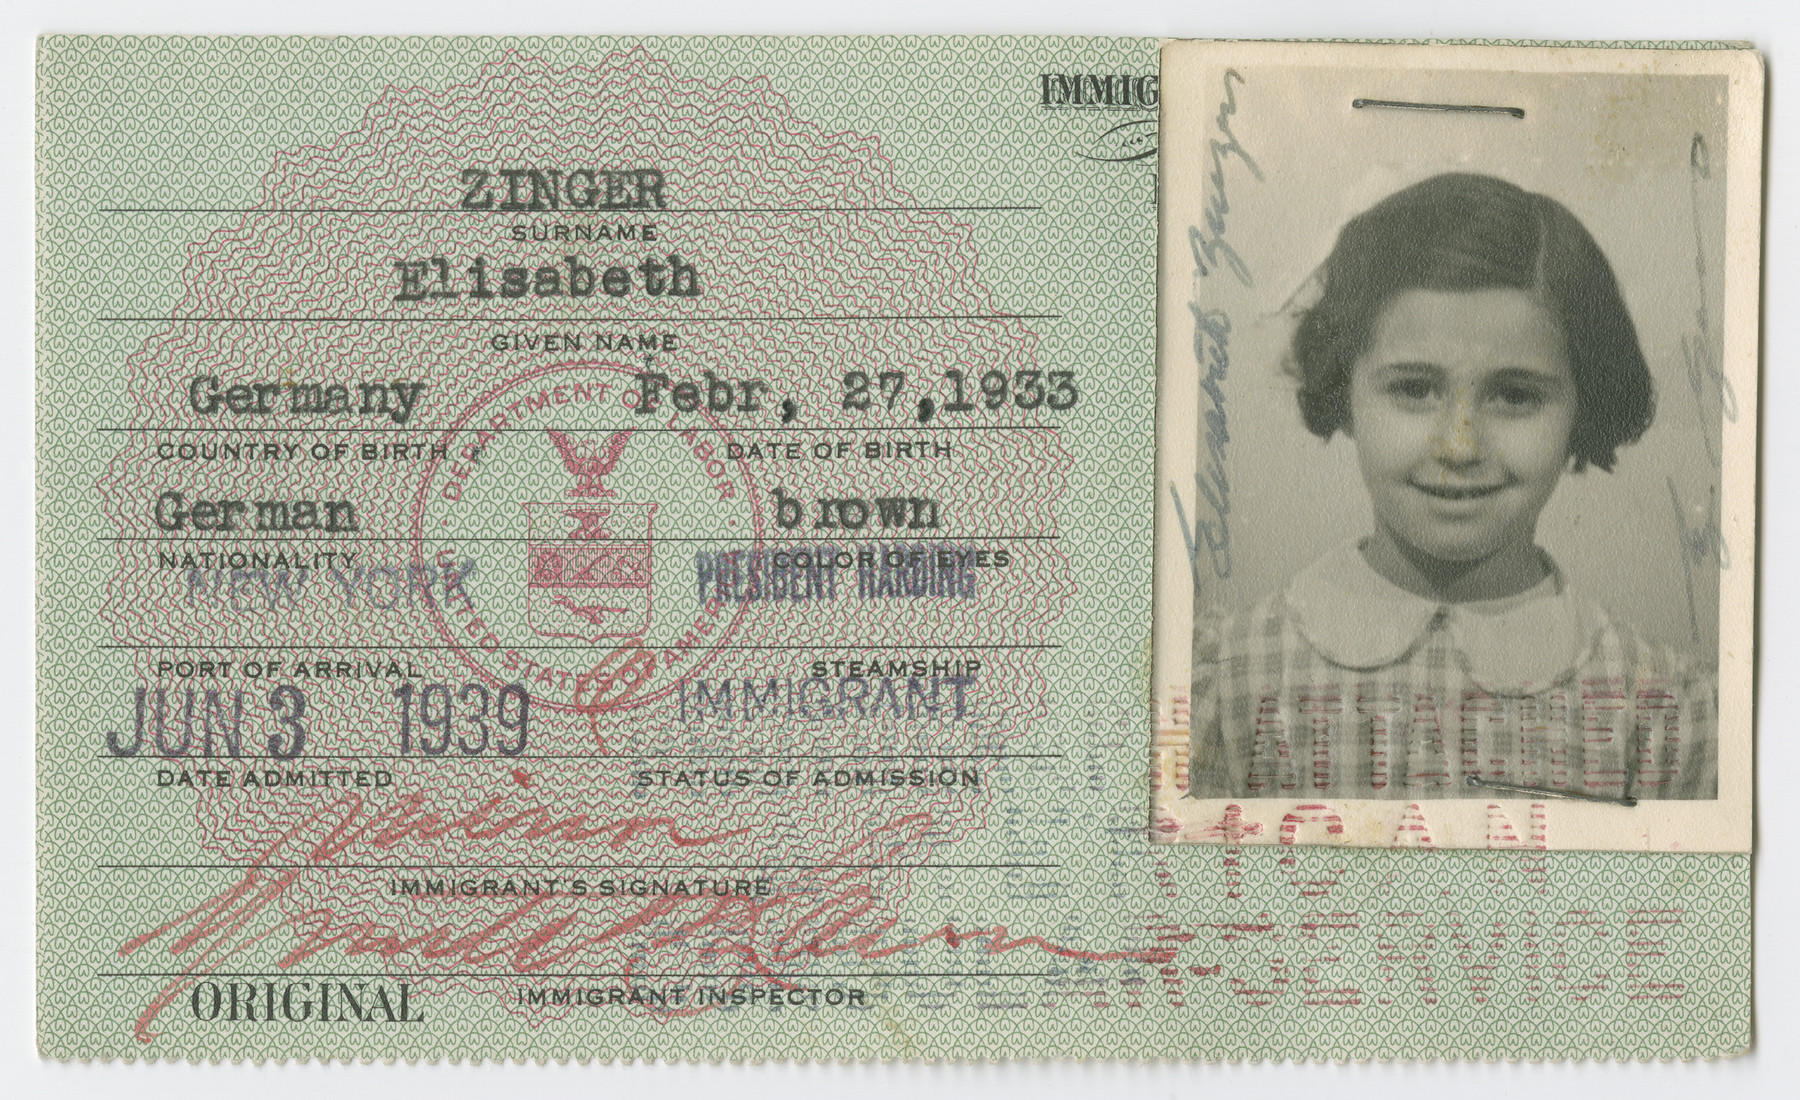 United States Immigrant Identification Card issued to Elisabeth Zinger

It states she was born in Germany though she probably was born in Vienna.